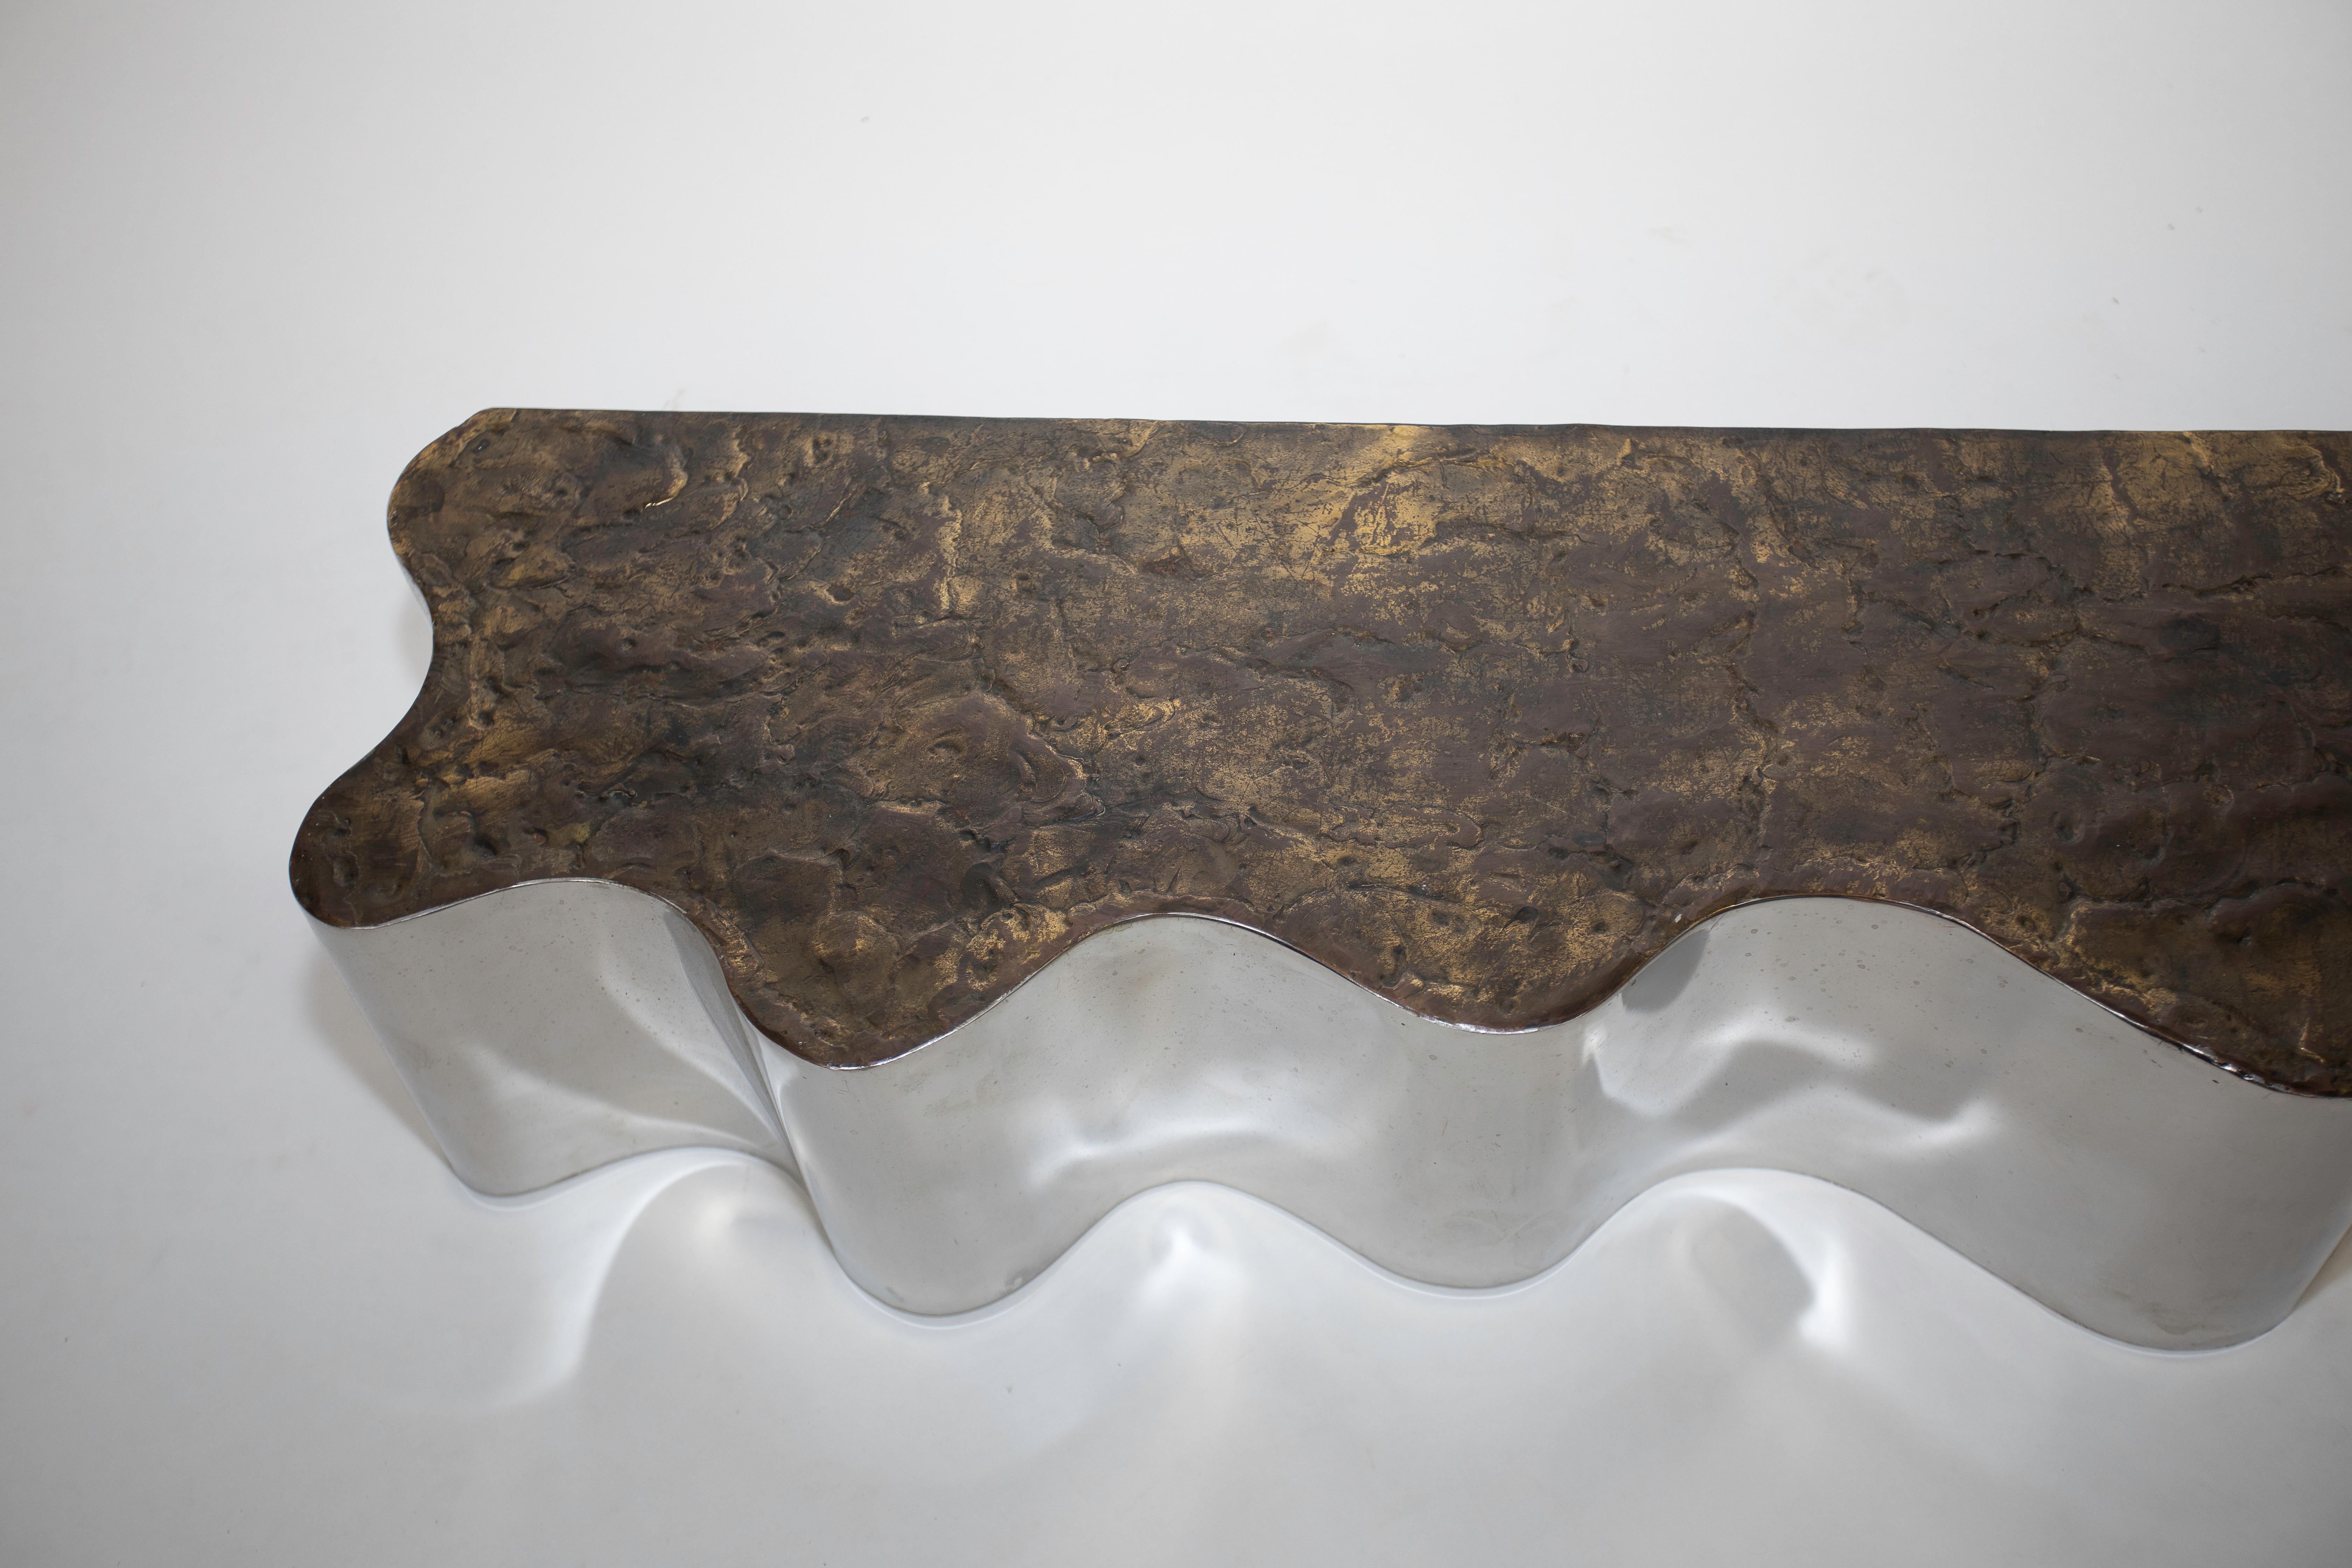 Silas seandel wall shelf
Steel and bronze
Signed.